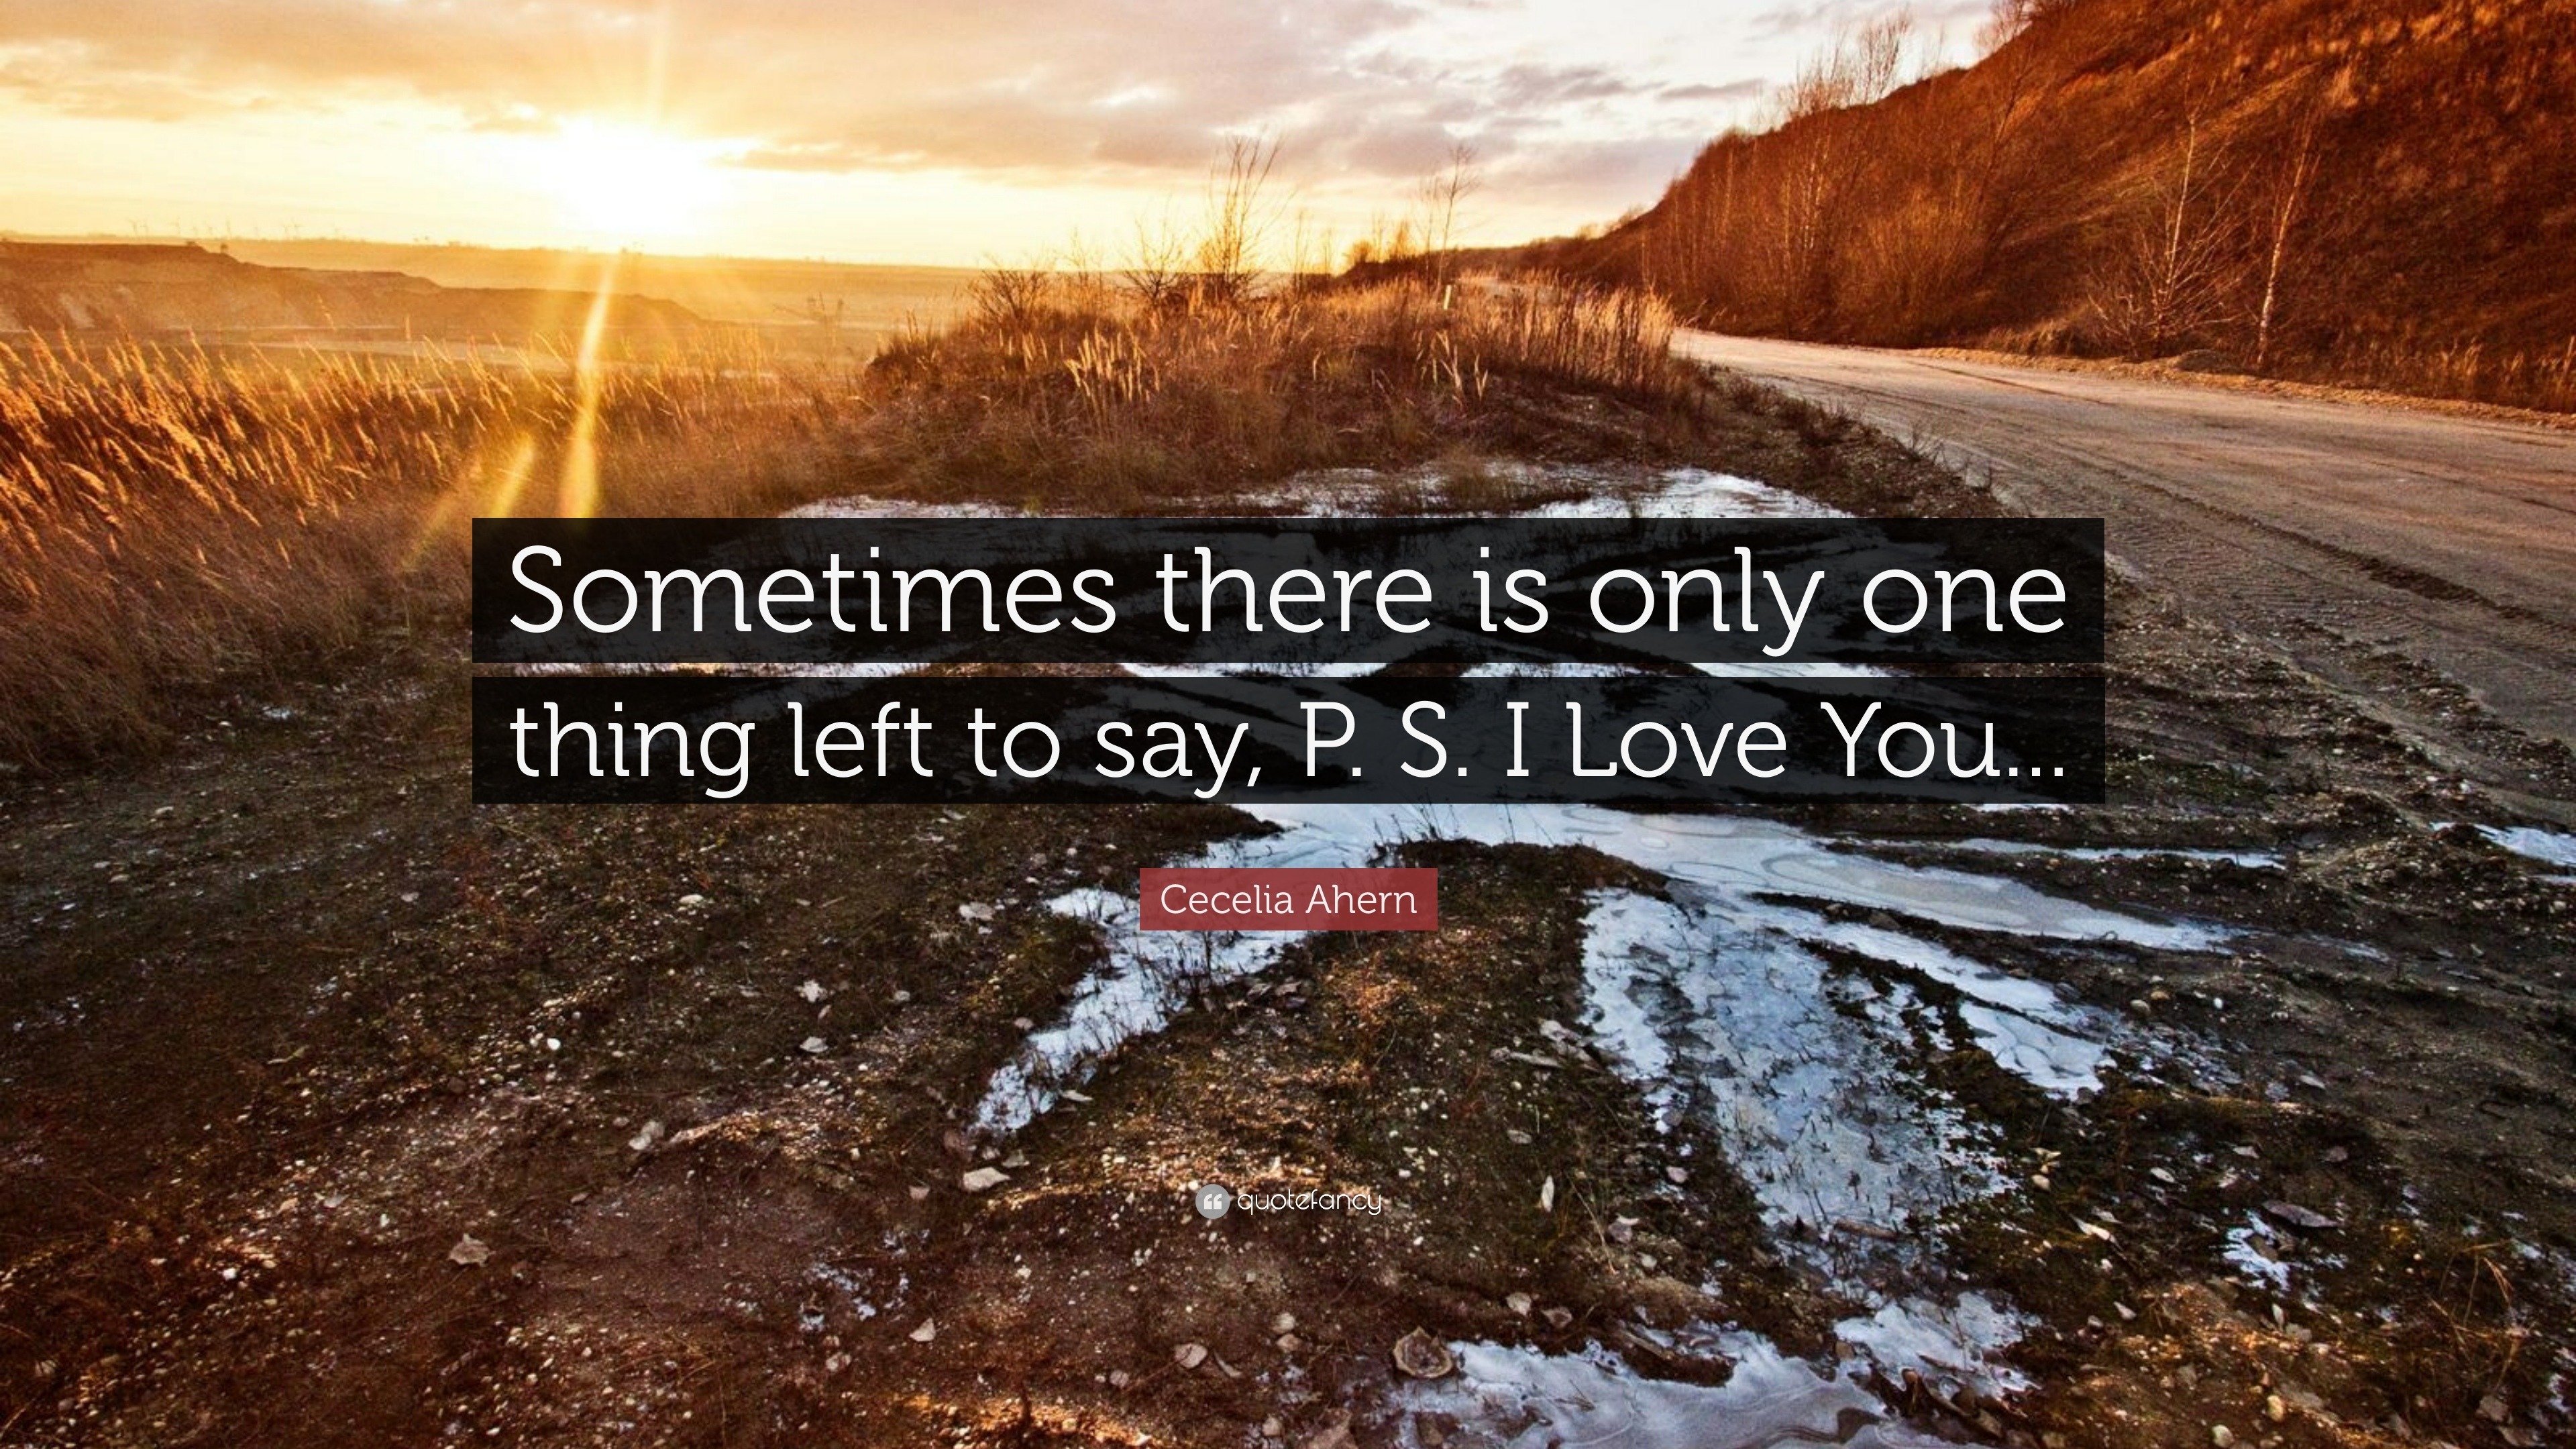 Cecelia Ahern Quote “Sometimes there is only one thing left to say P S